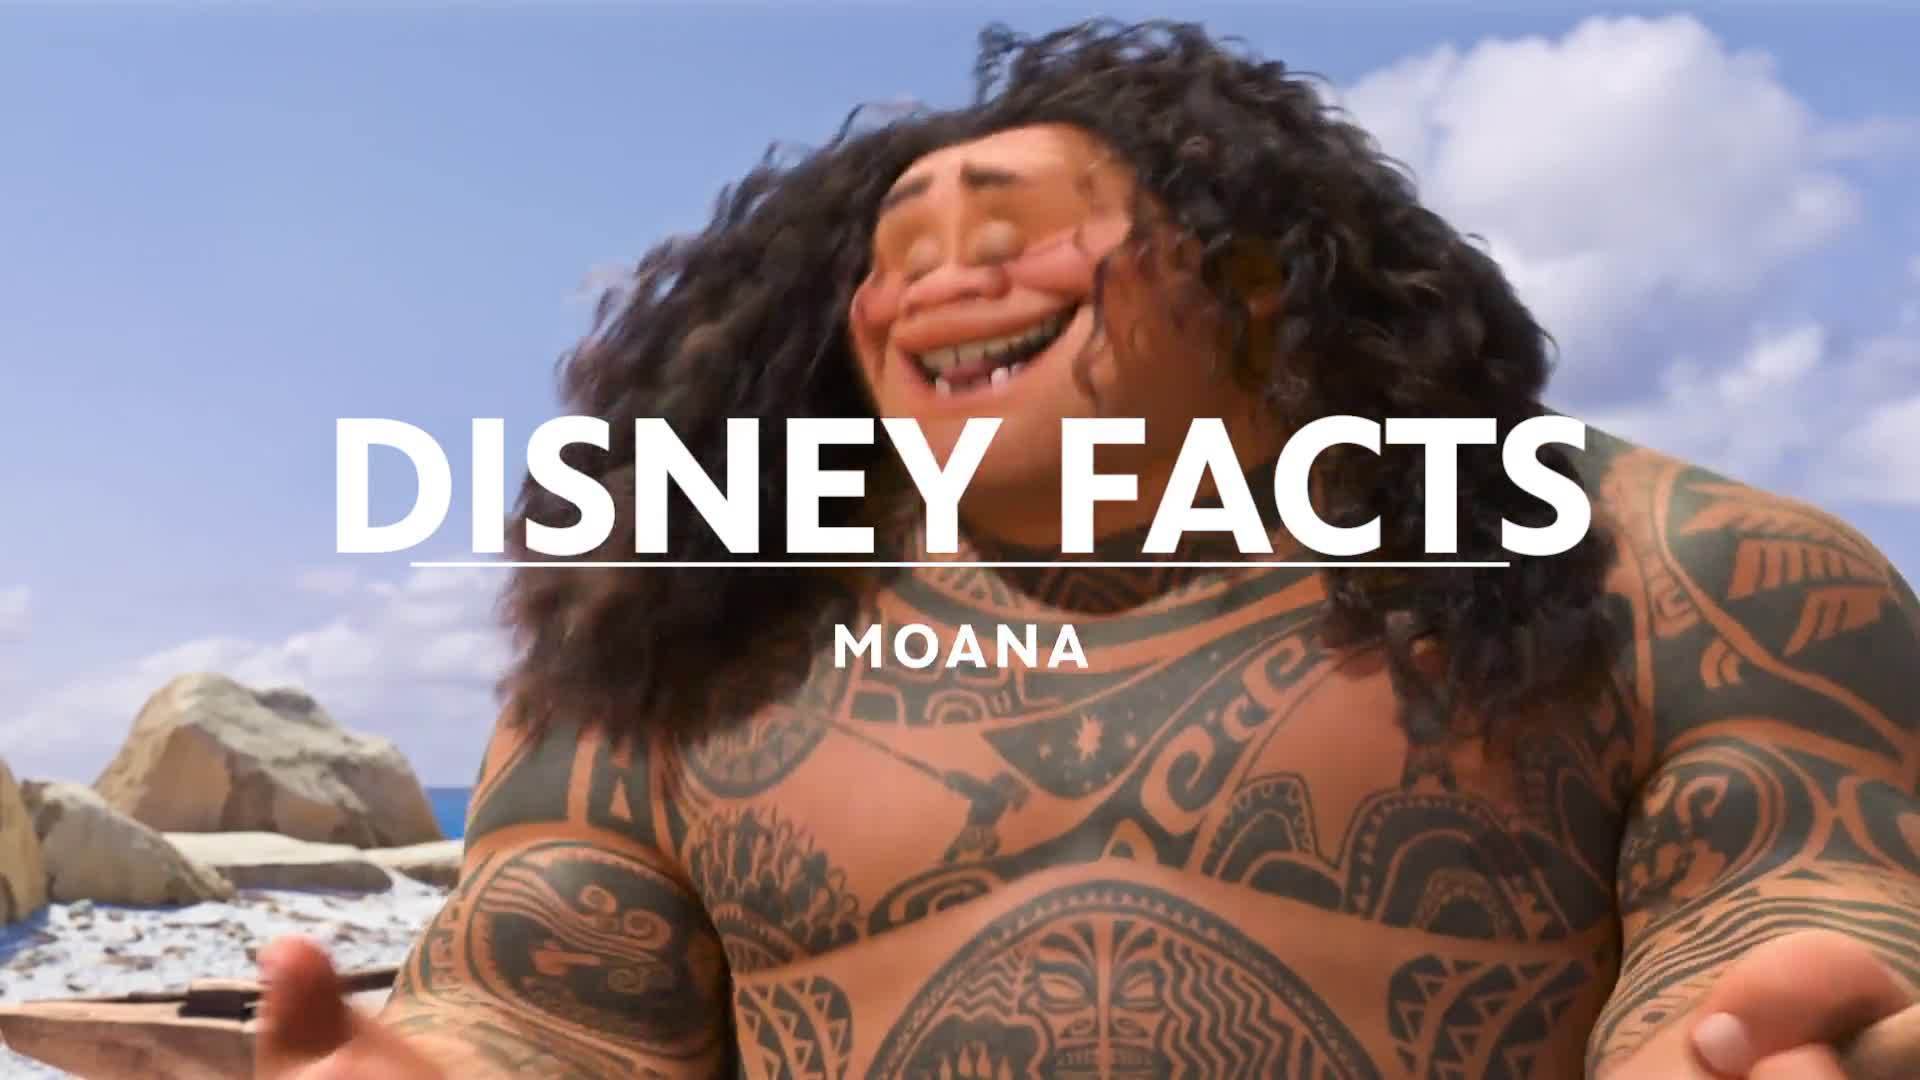 Moana Fun Facts and Easter Eggs | Disney Facts by Disney